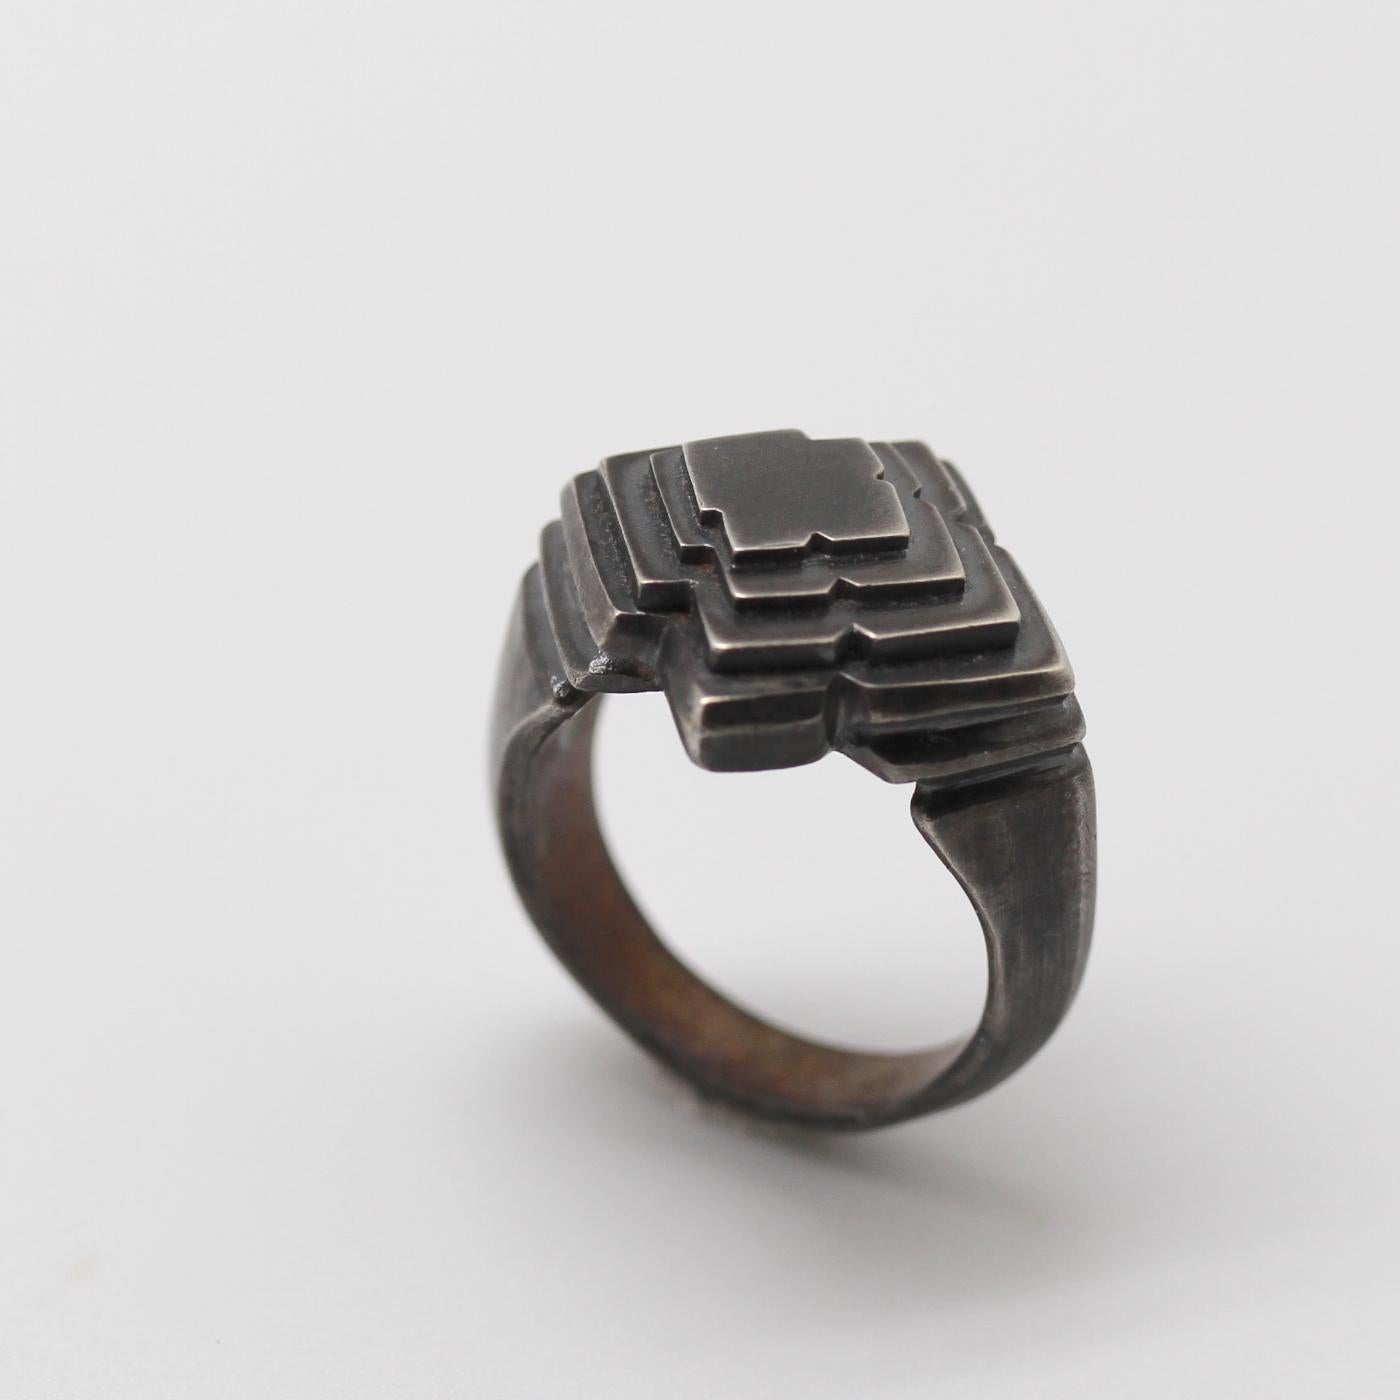 Geometric shapes incrementally repeat and taper in an homage to micro-structural phenomenons in nature and in ancient architecture in the Ziggurat Ring by Metaalia Jewelry. Cast and hand fabricated in sterling silver, oxidized. 

Size is 9.75. This